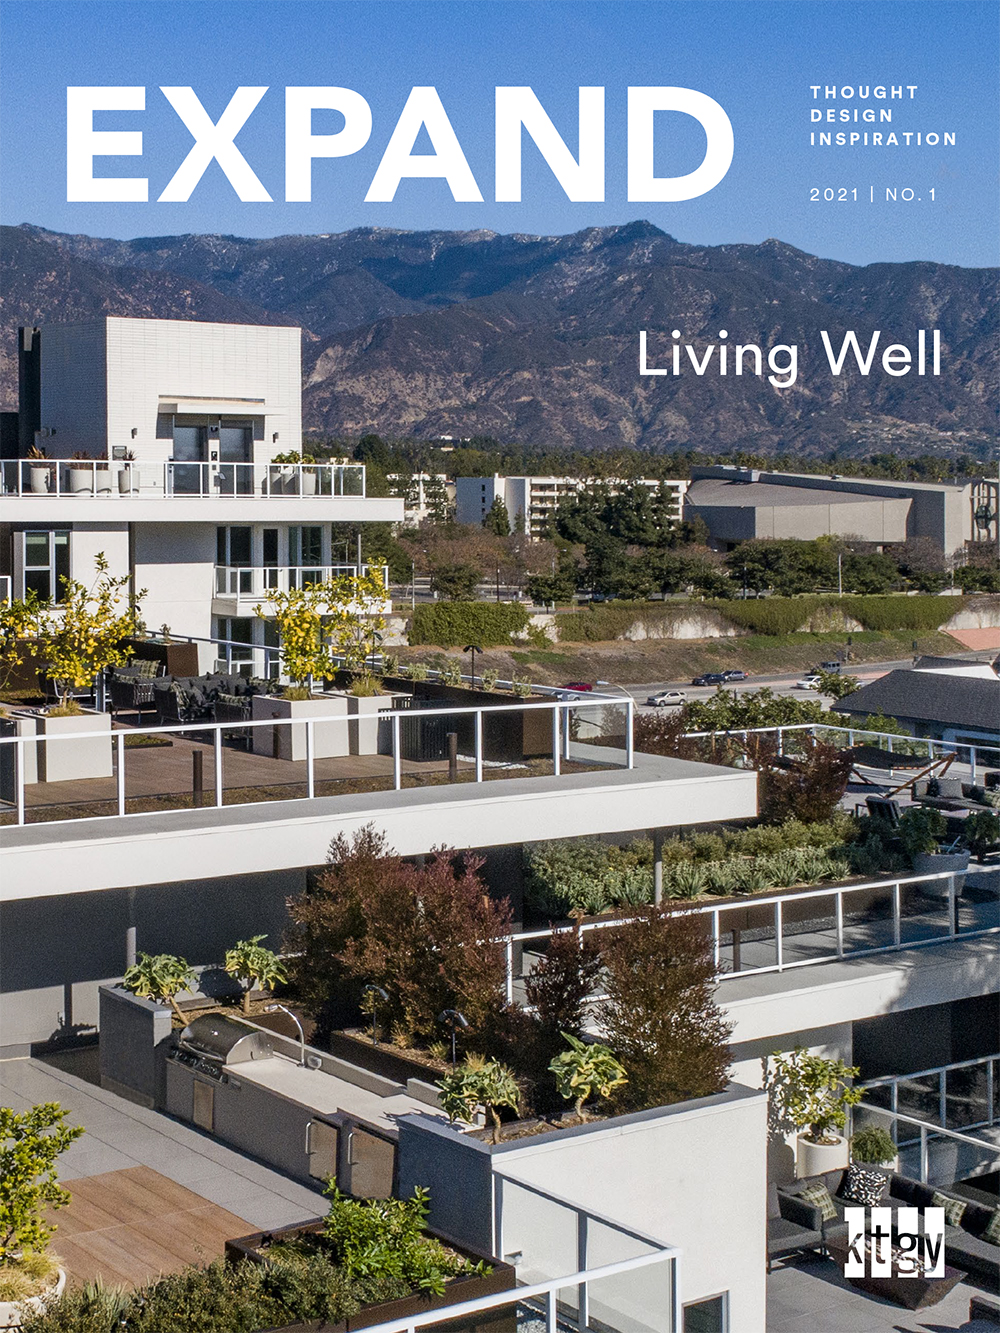 EXPAND | 2021 | NO. 1 | Living Well